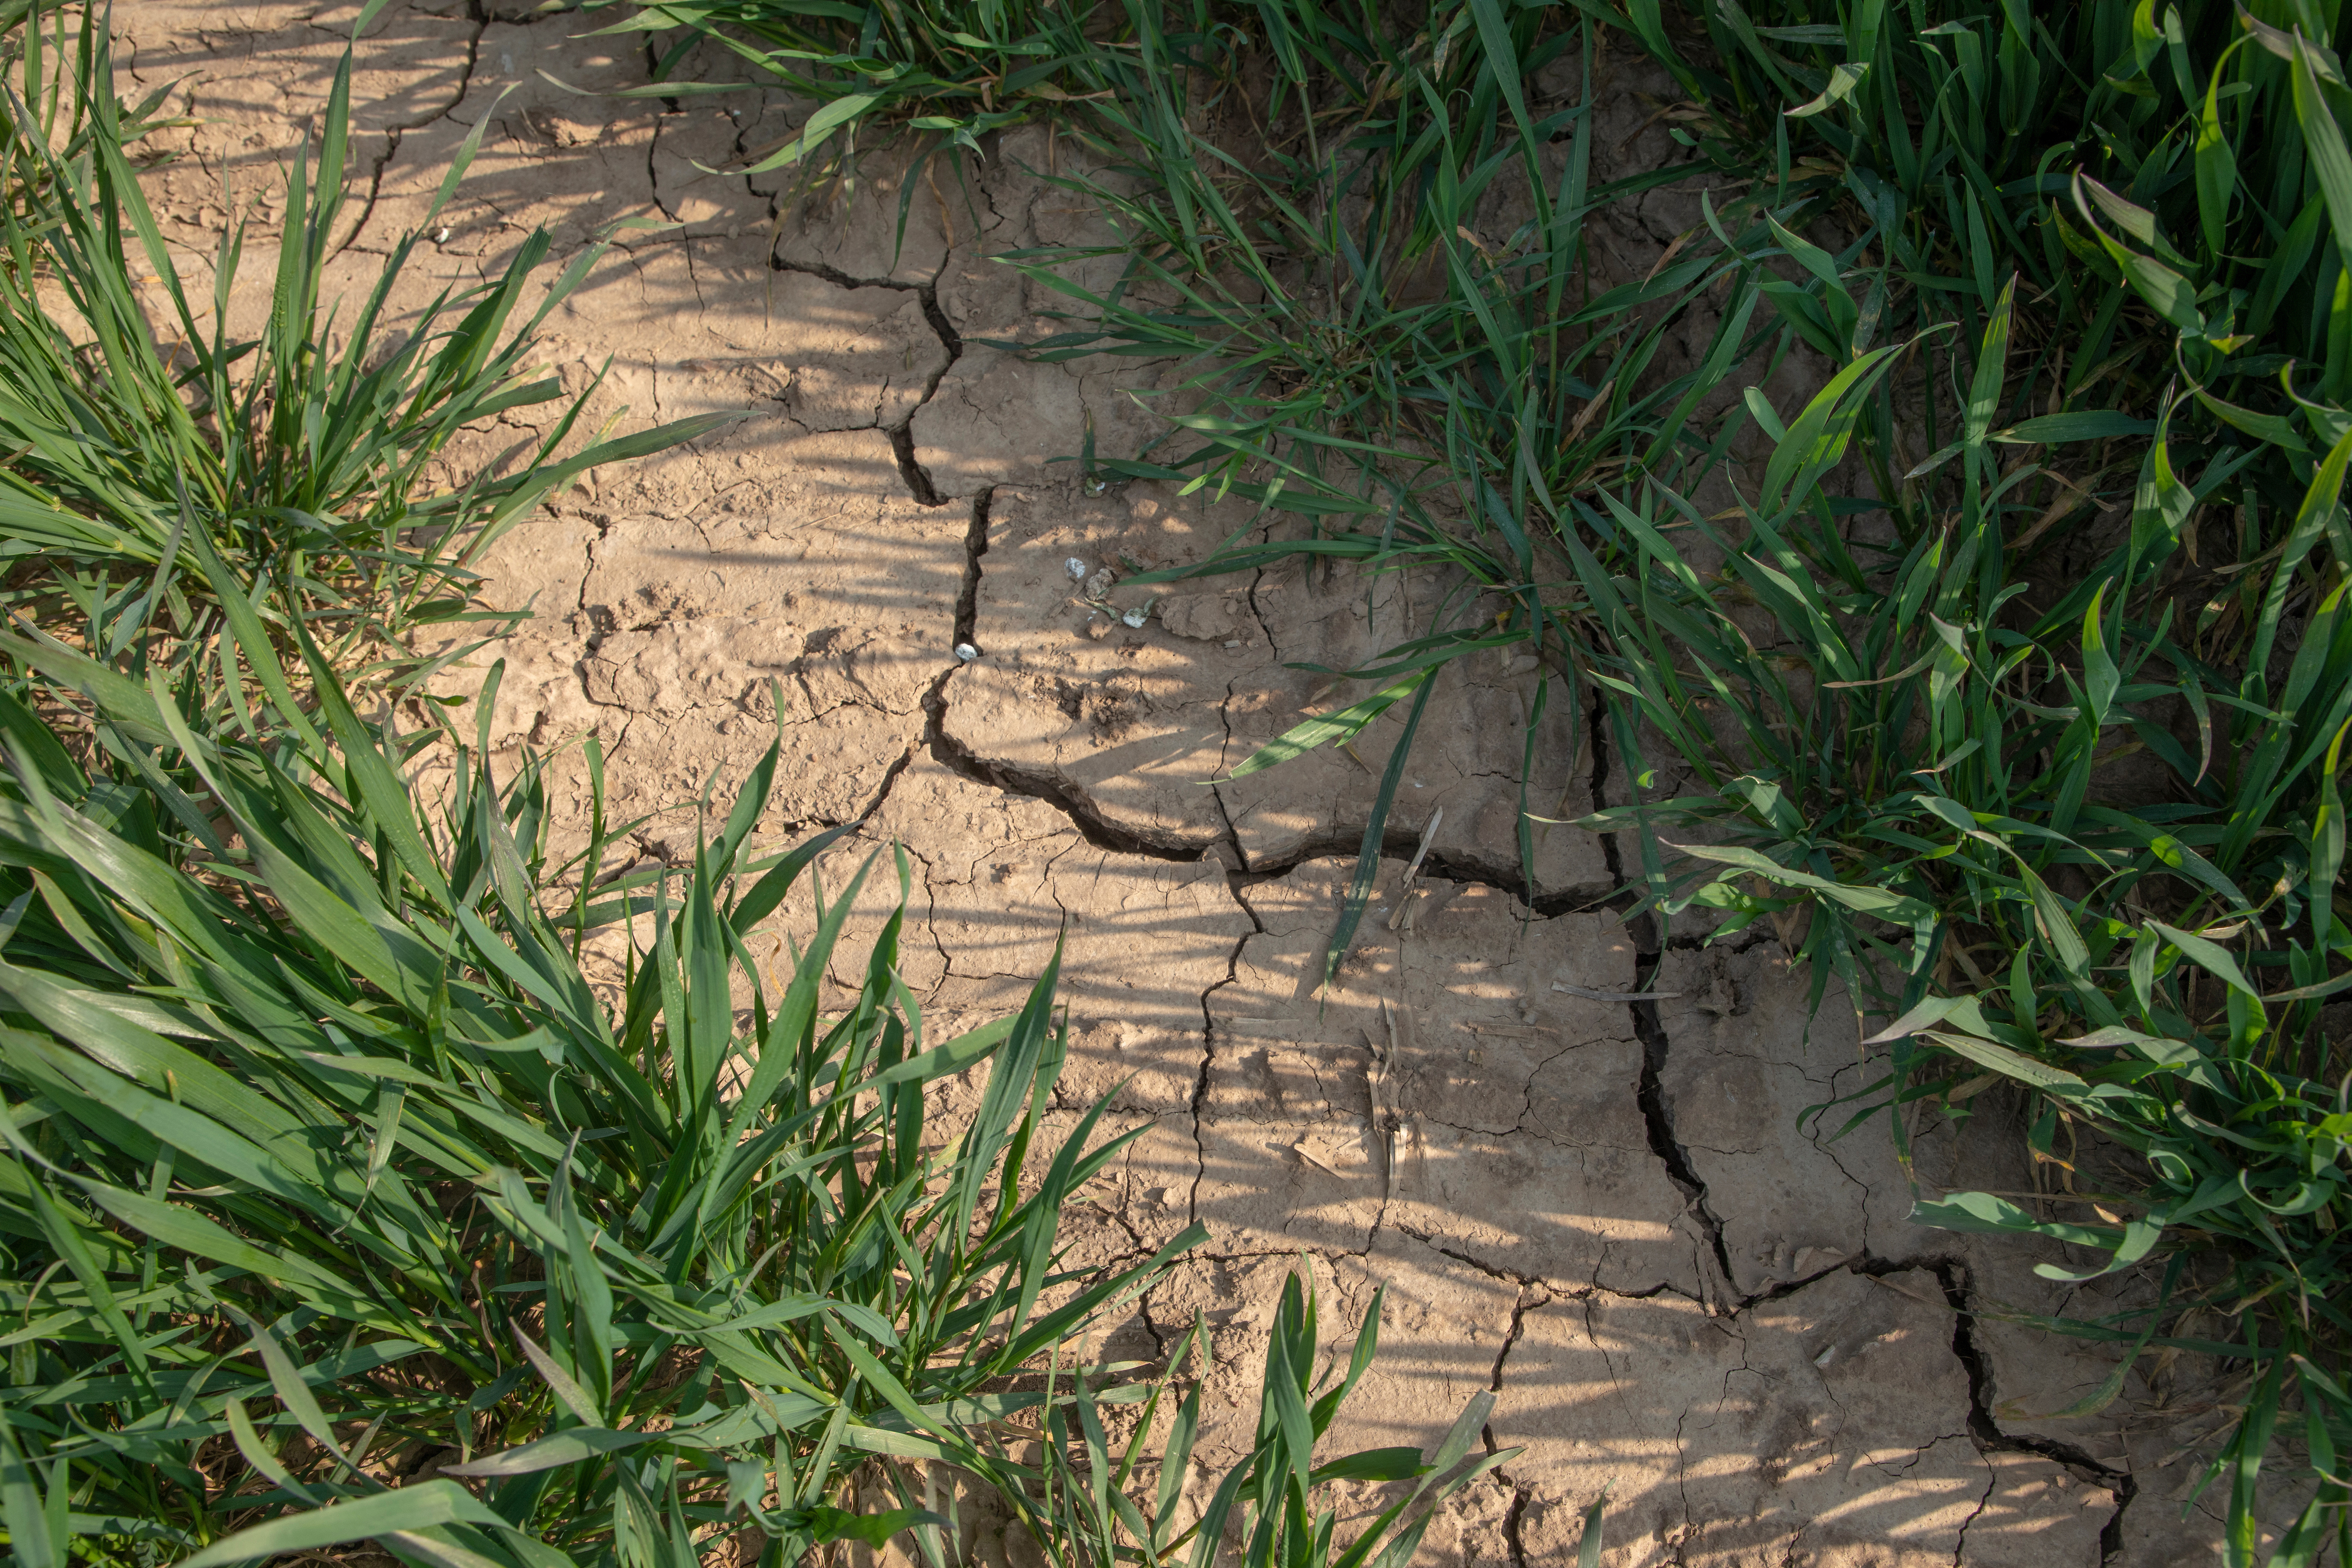 Cracked and dry soil